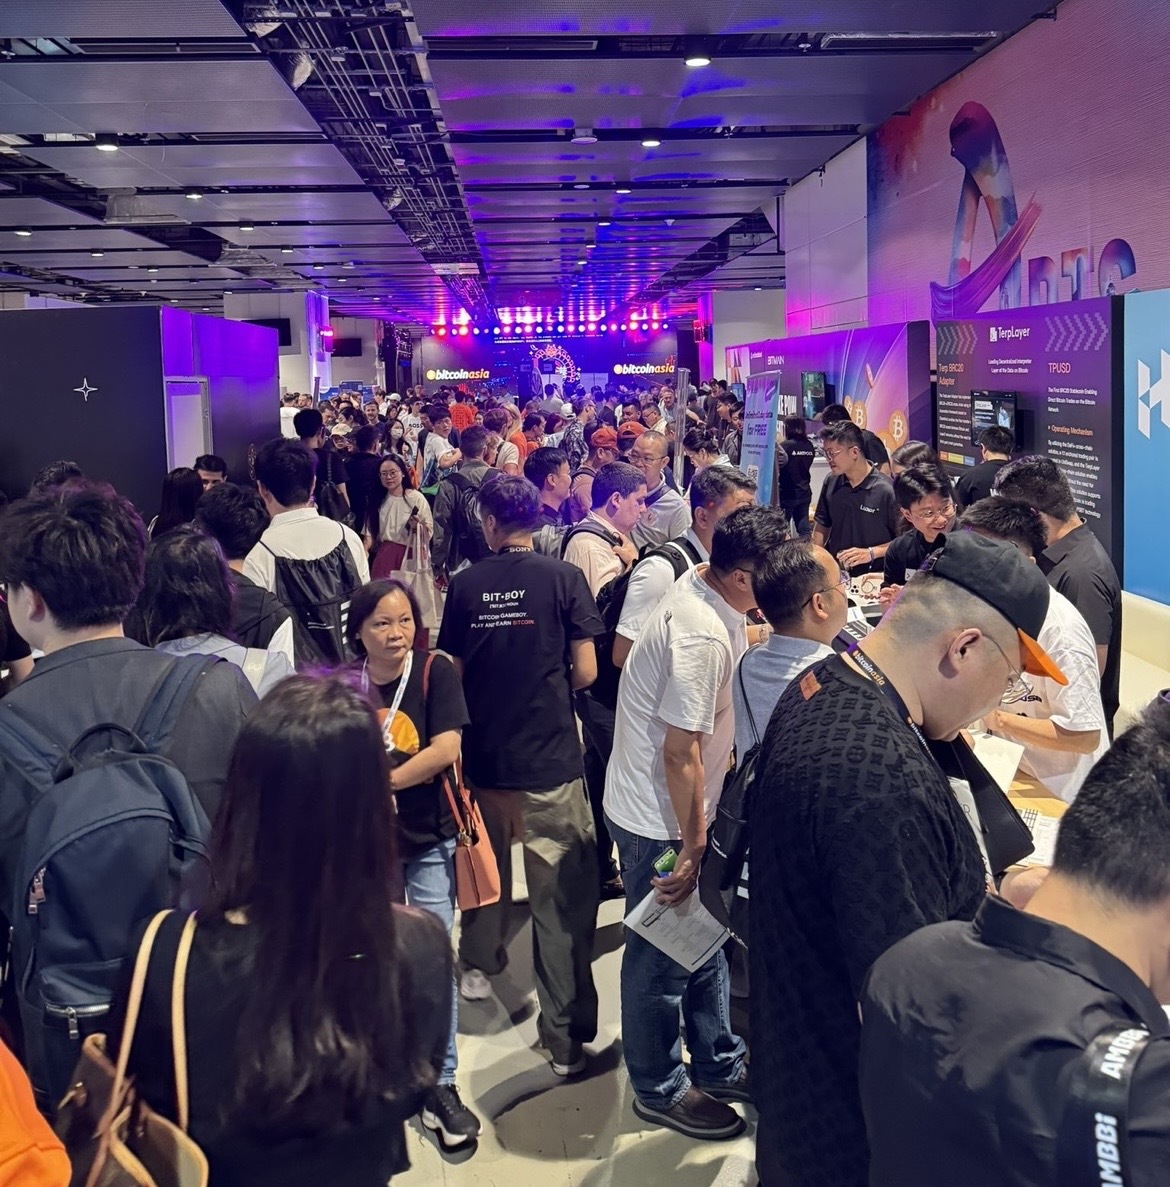 🇭🇰 Asia just had it's largest ever #Bitcoin conference in Hong Kong this week, setting record breaking numbers. Bullish 🚀